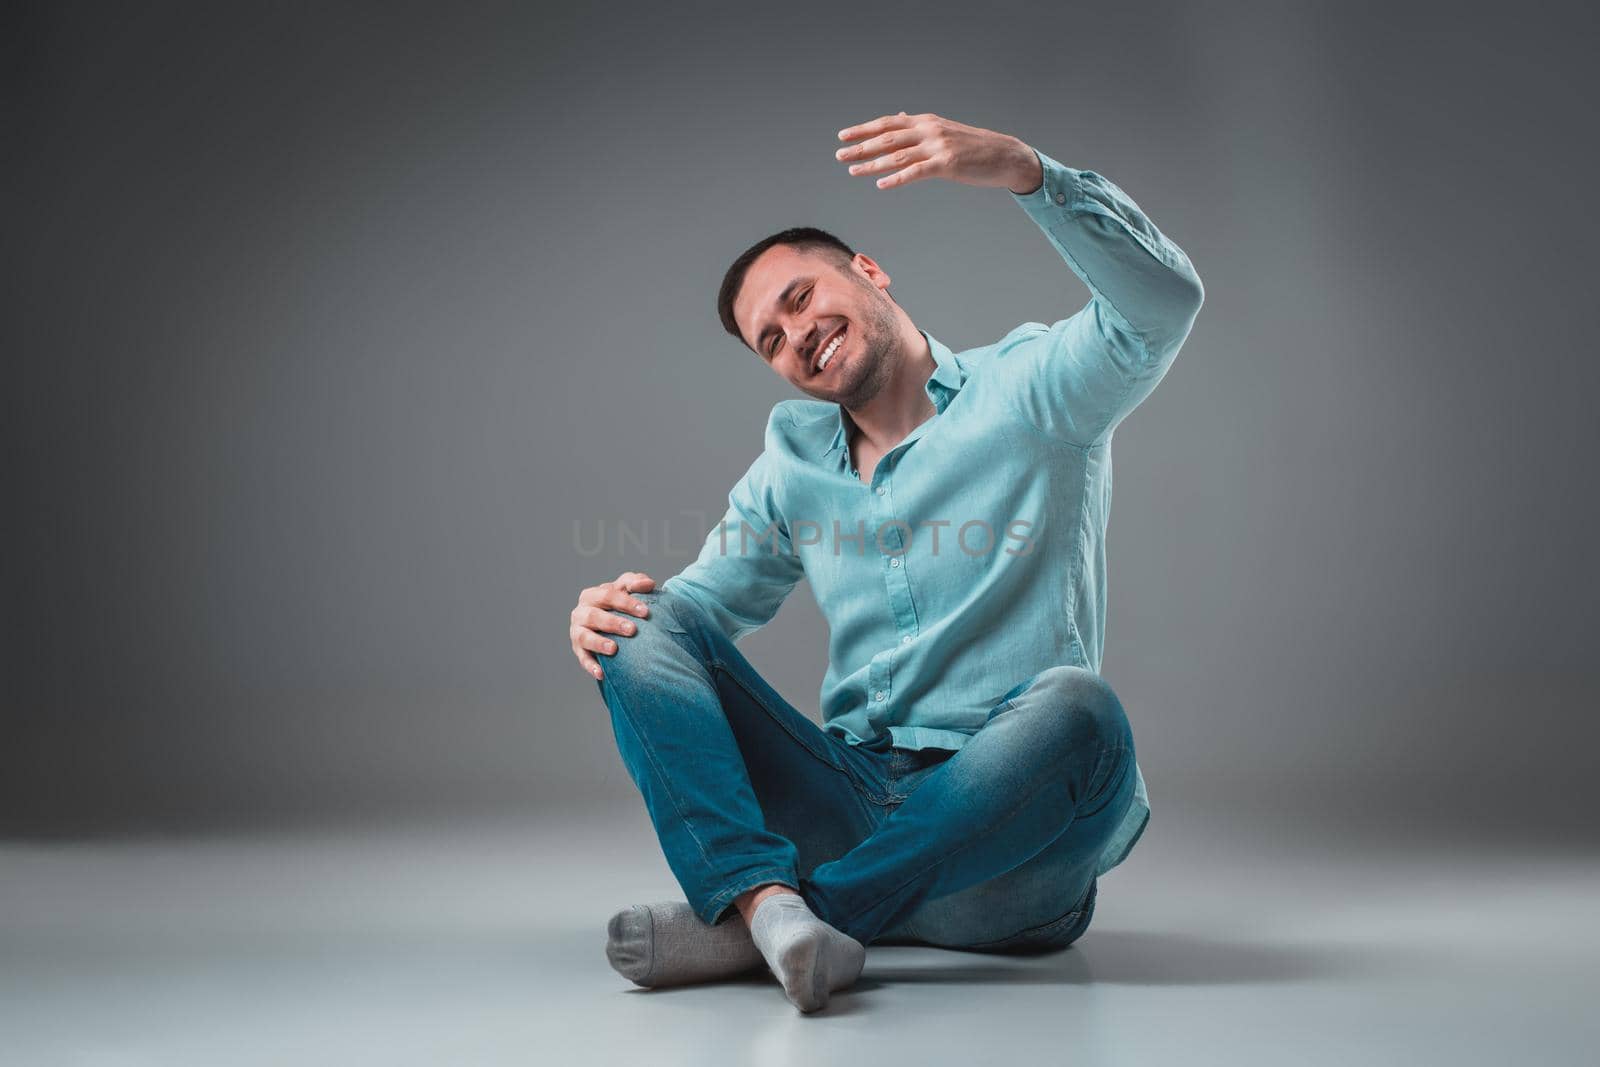 Handsome young man sitting on a floor with raised hands, isolated on gray background. Emotion concept